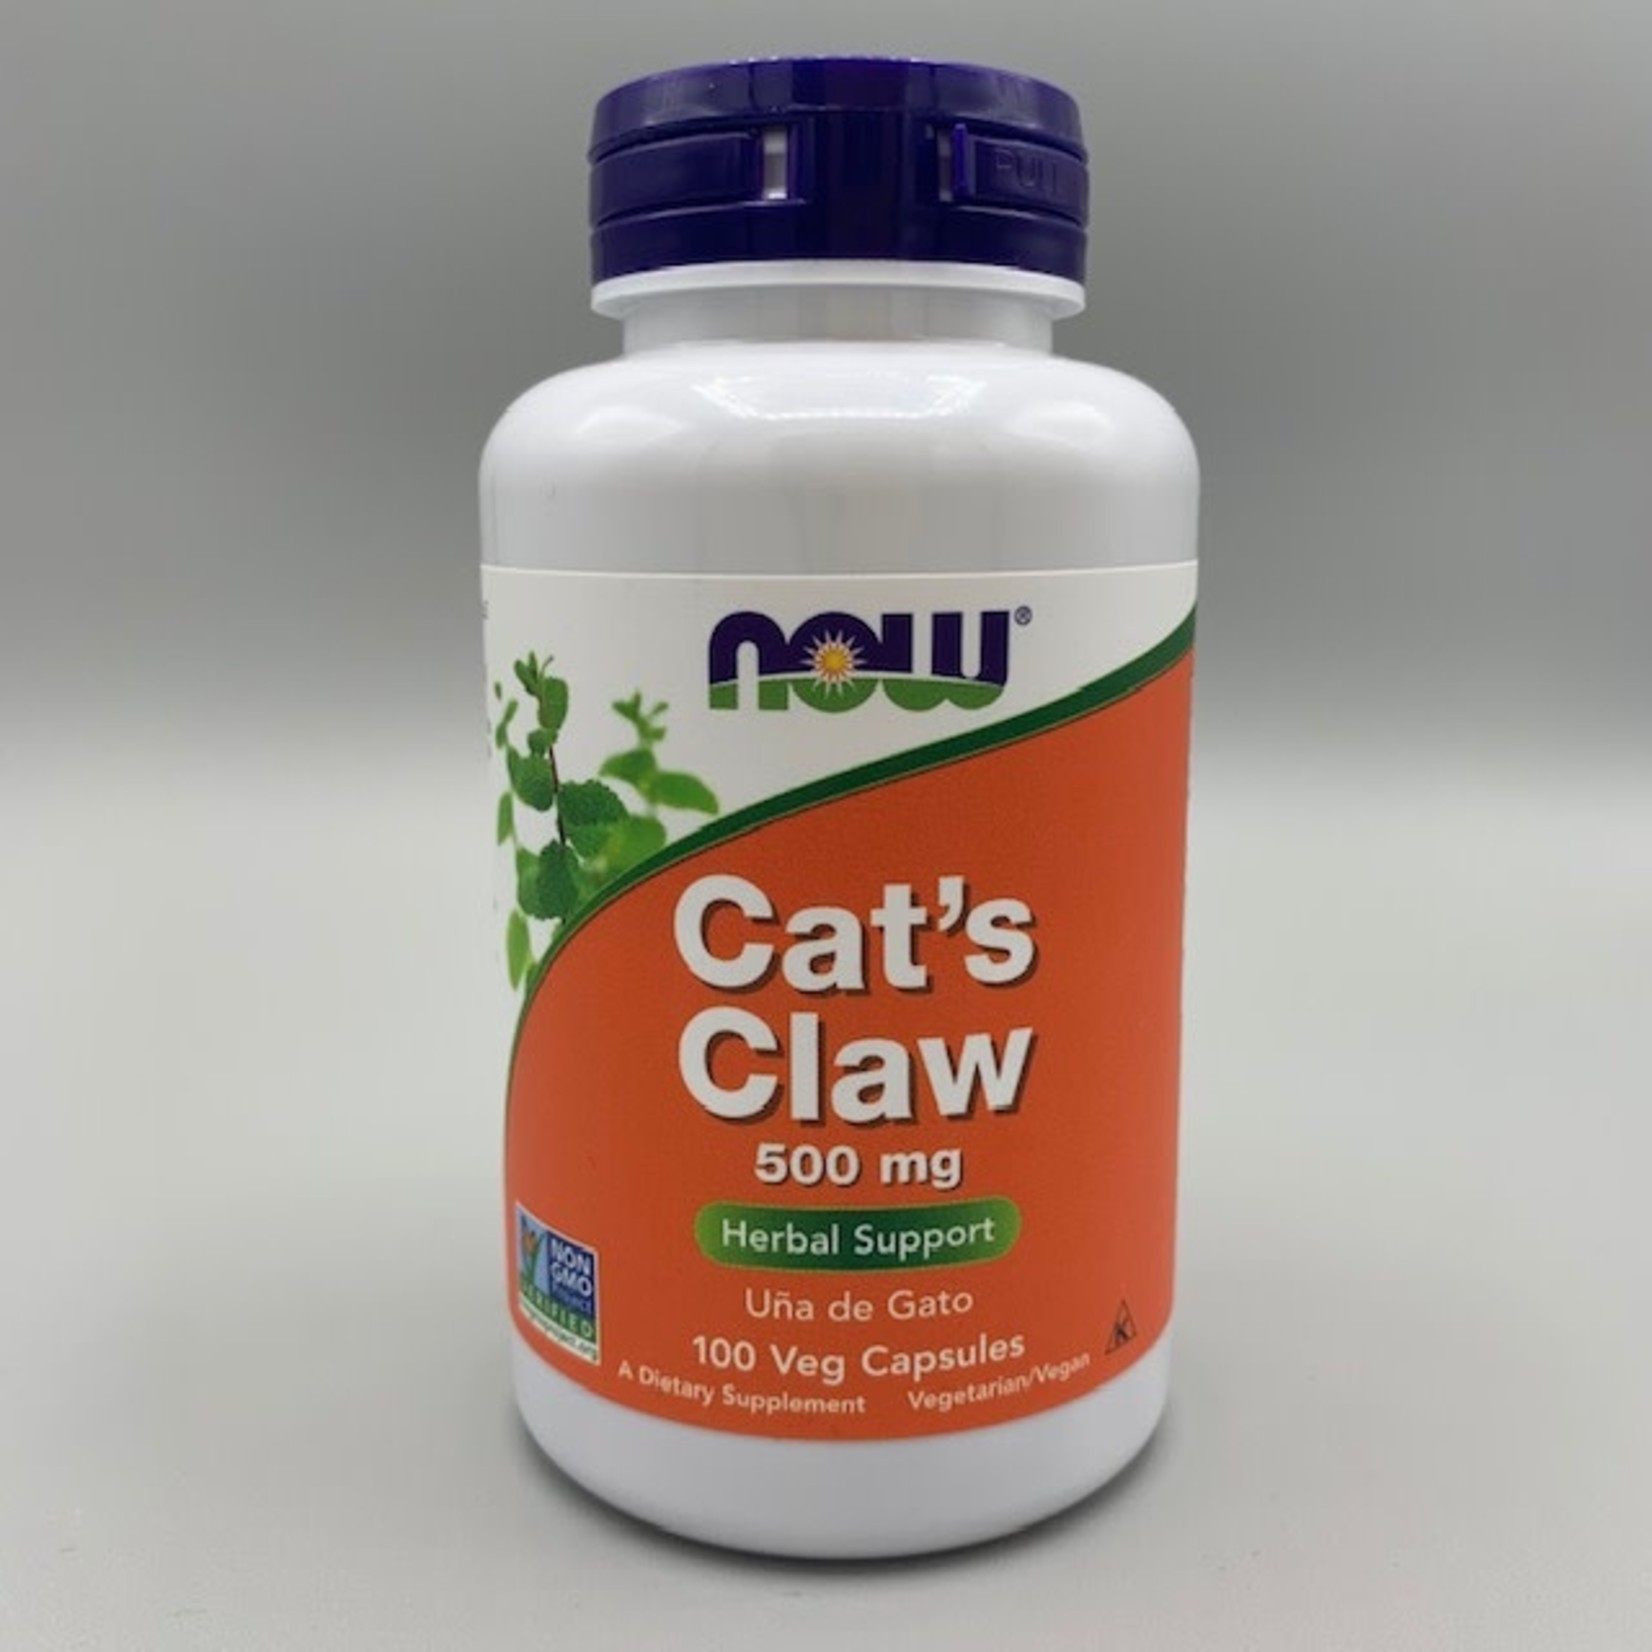 NOW NOW Cat's Claw - 500 mg, 100 Veg. Capsules